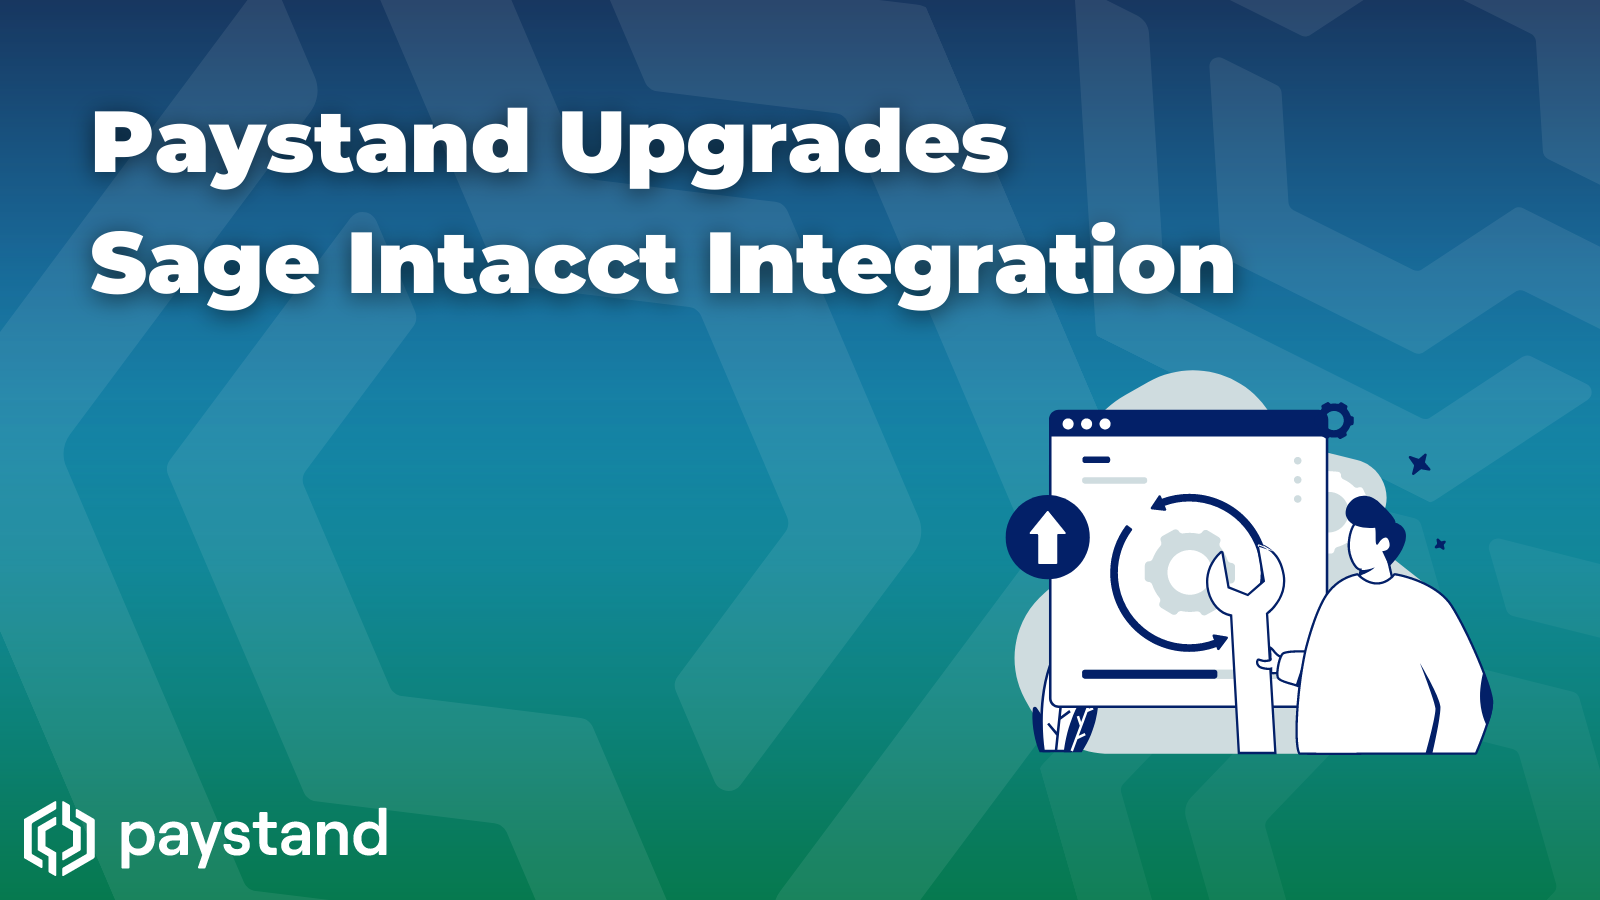 Paystand Upgrades its Sage Intacct Integration, Helping Enterprise AR Teams Put Collections on Auto-Pilot and Accept Payments in a Flexible Manner